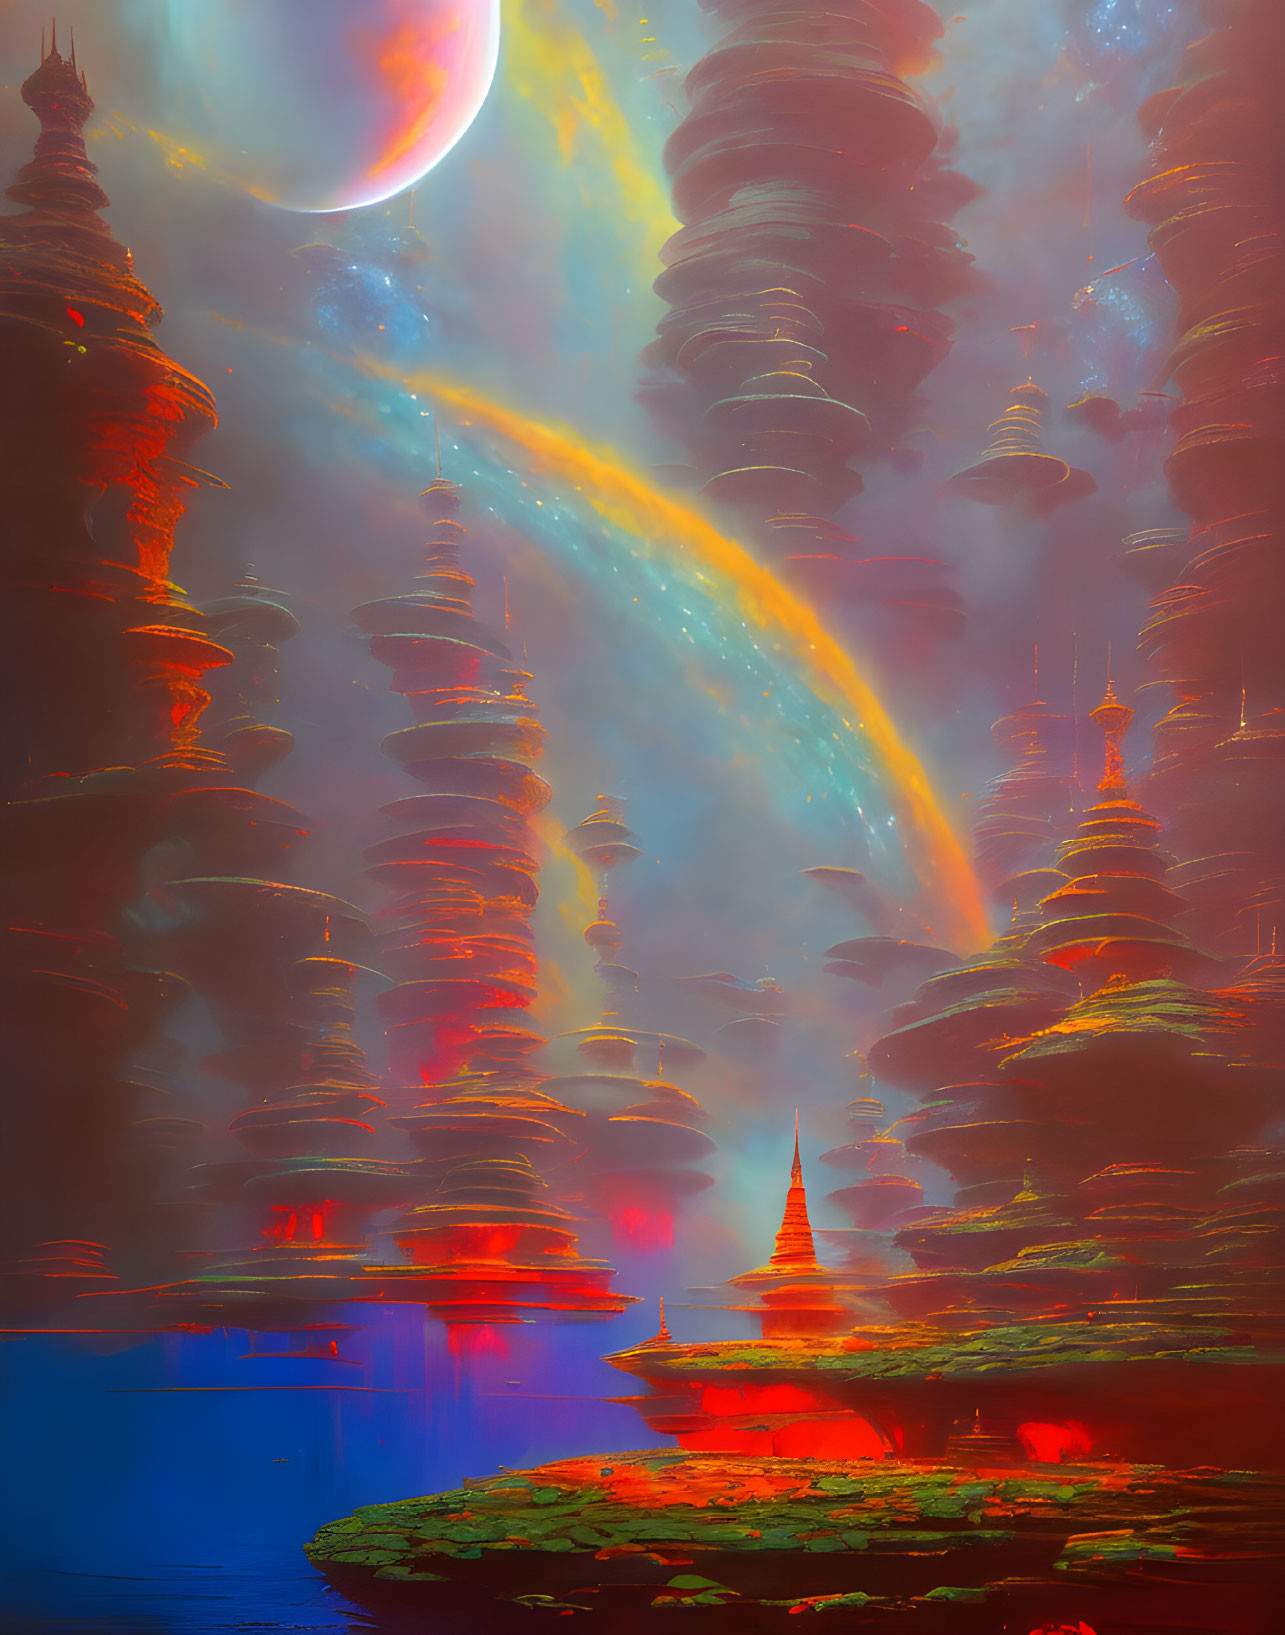 Futuristic sci-fi landscape with towering spire-like structures and vibrant comet in red sky